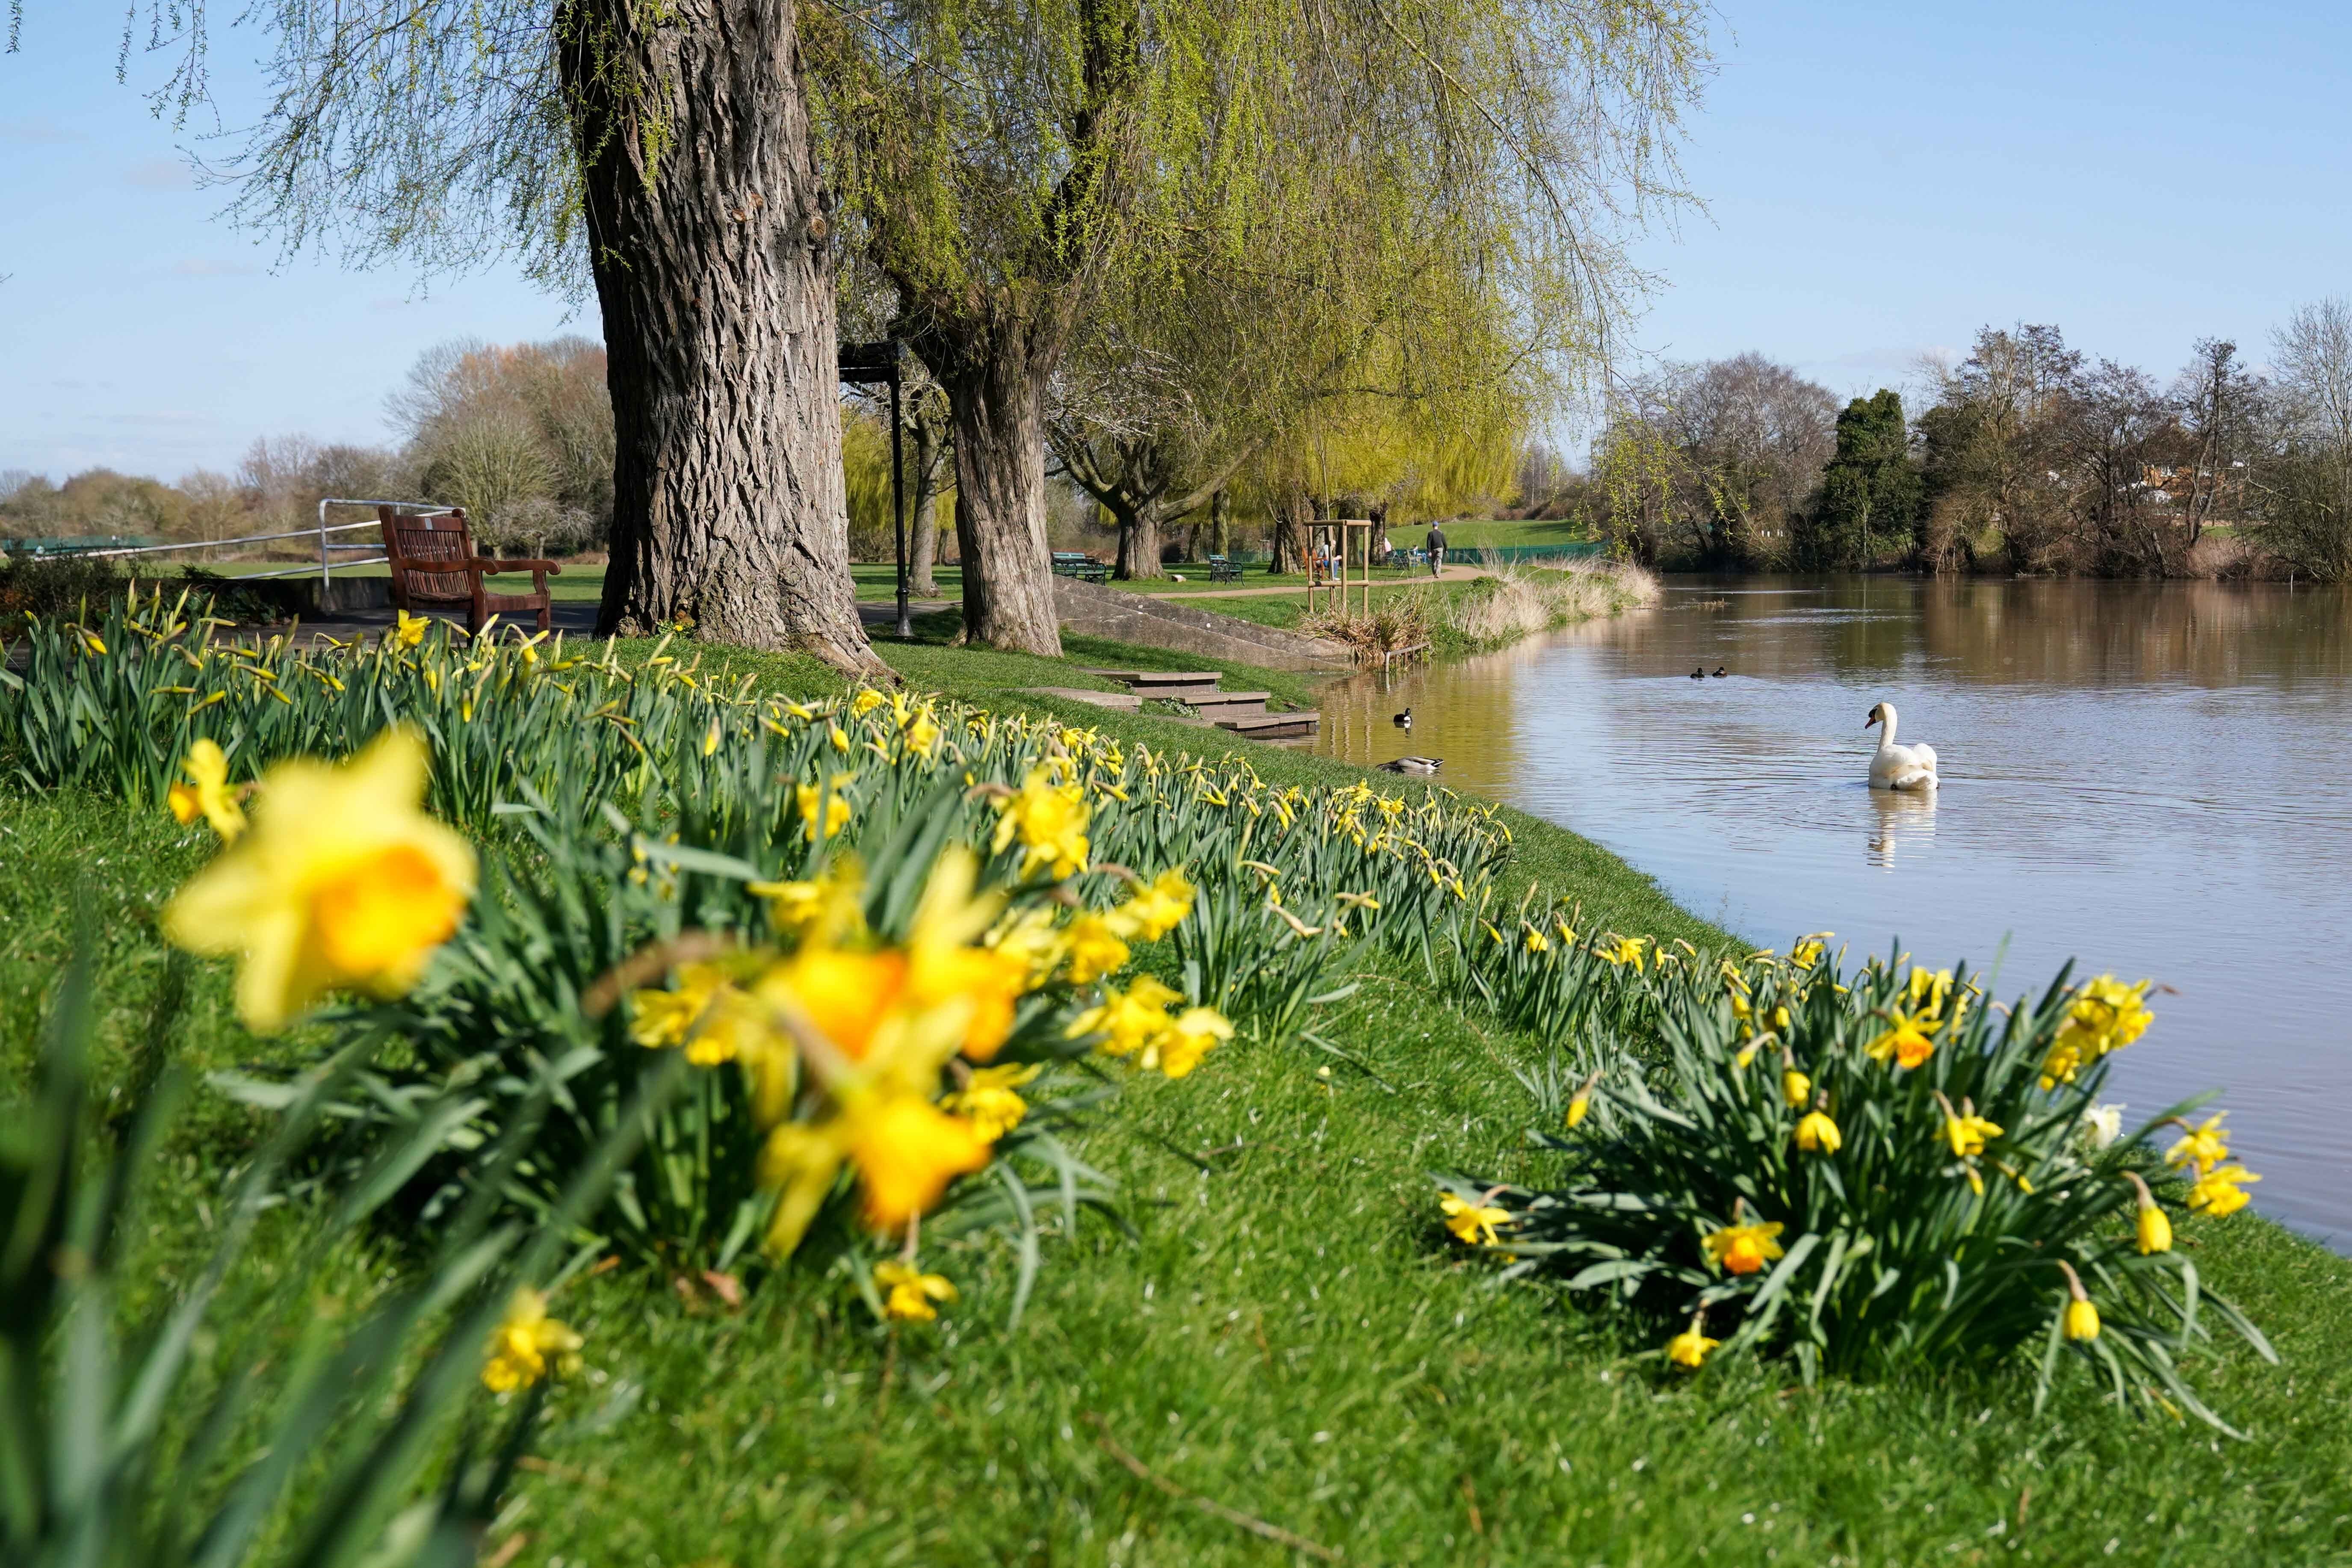 Wall-to-wall sunshine is forecast for Britain on Saturday